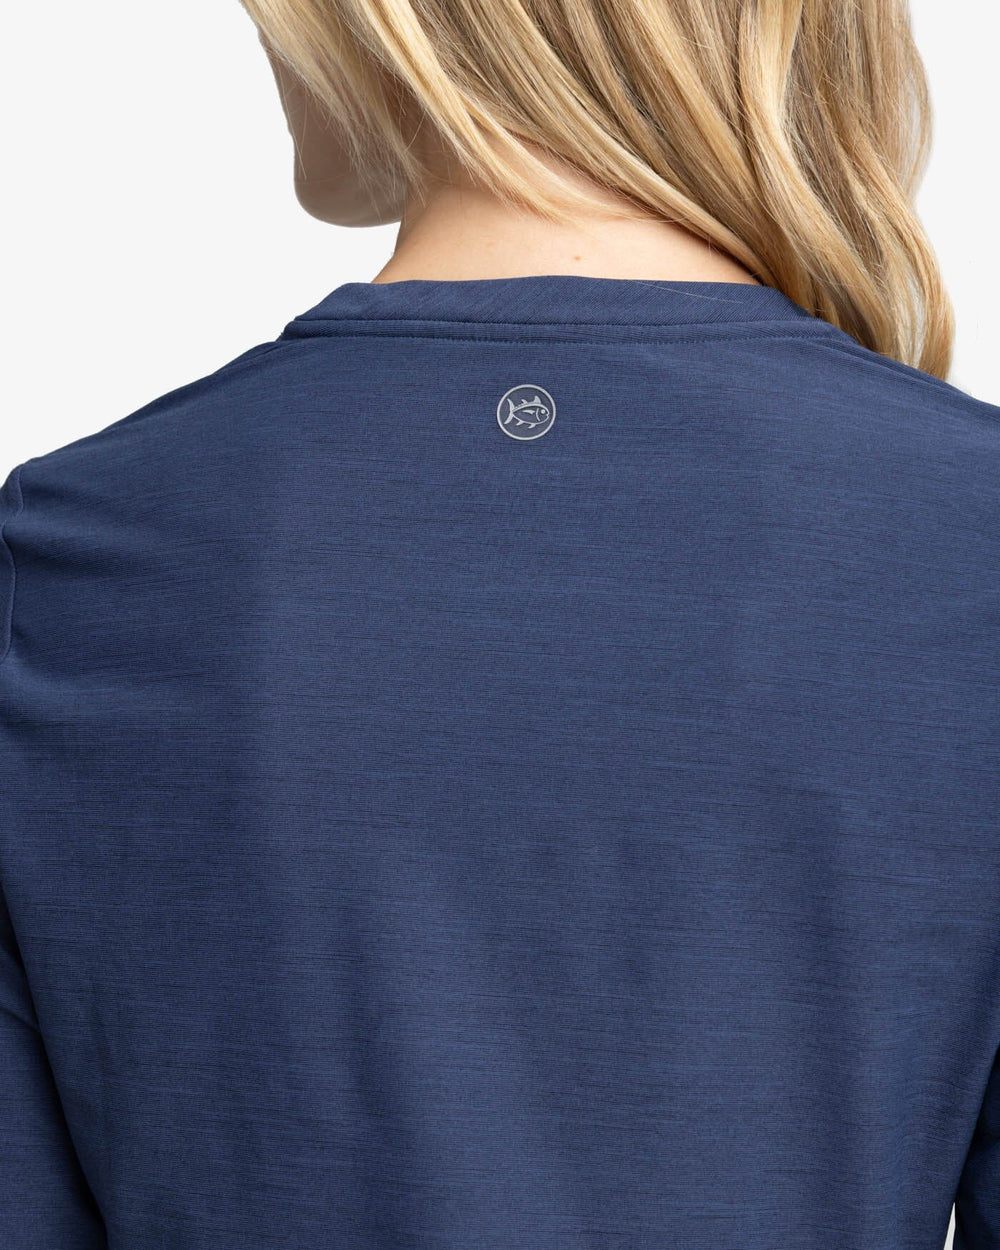 The detail view of the Southern Tide Margot brrr°-illiant Twist Knot Top by Southern Tide - Nautical Navy